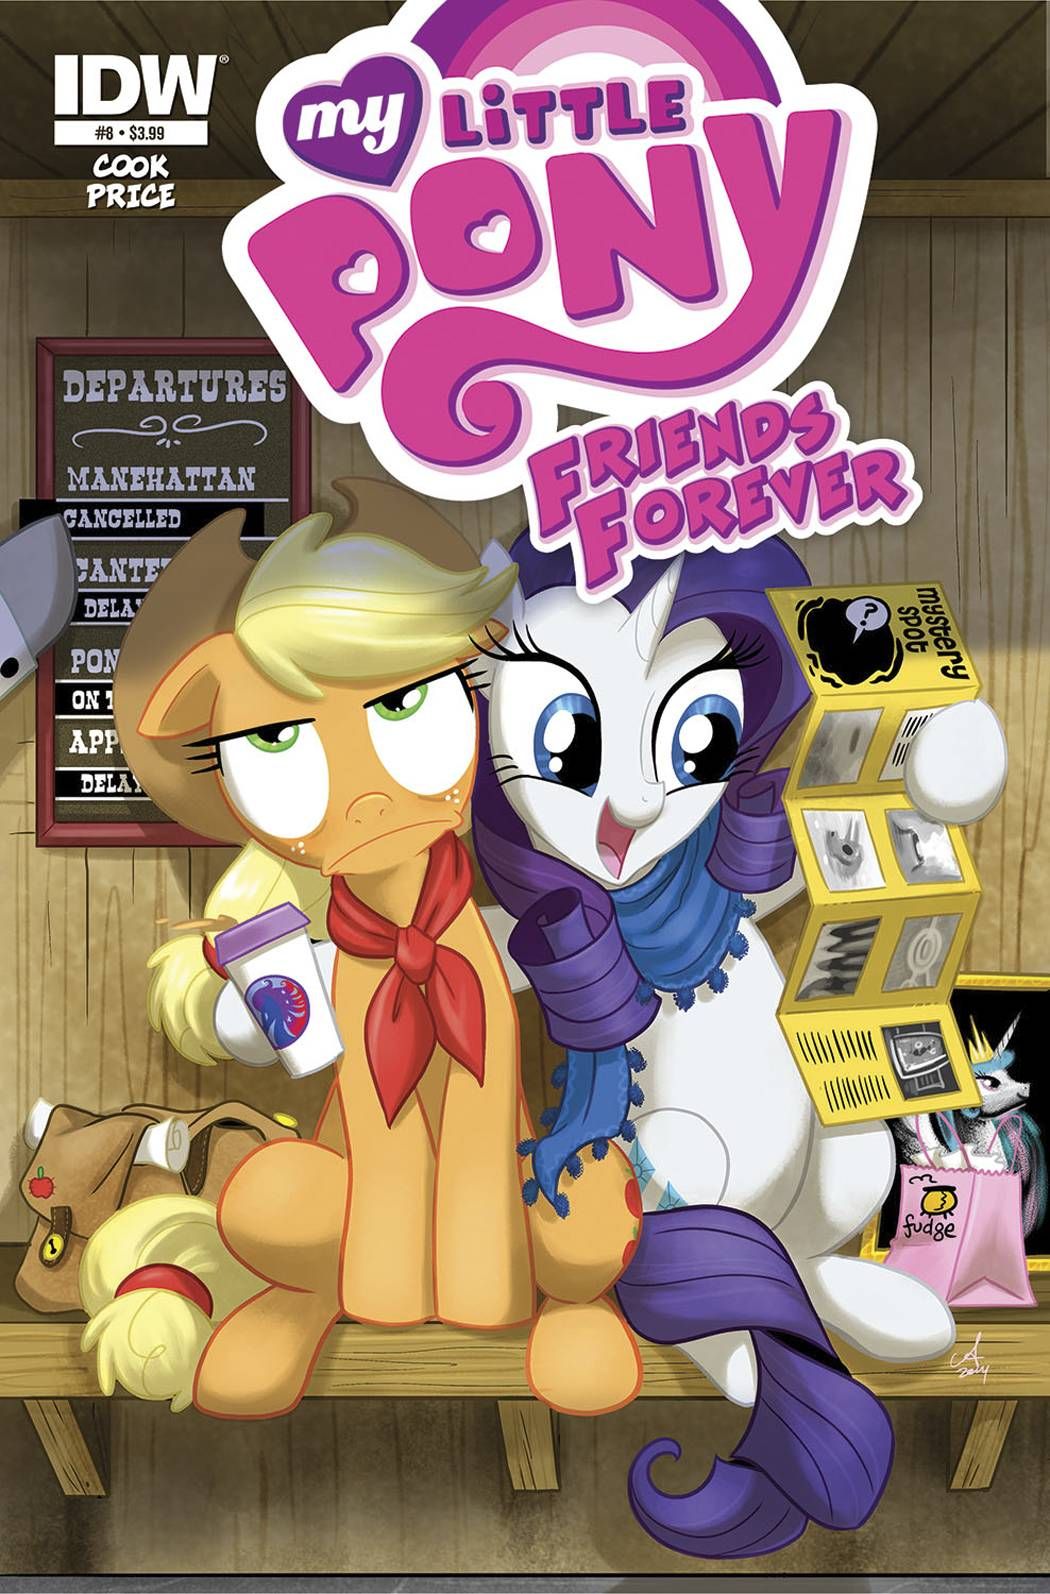 My Little Pony Friends Forever #8 Comic